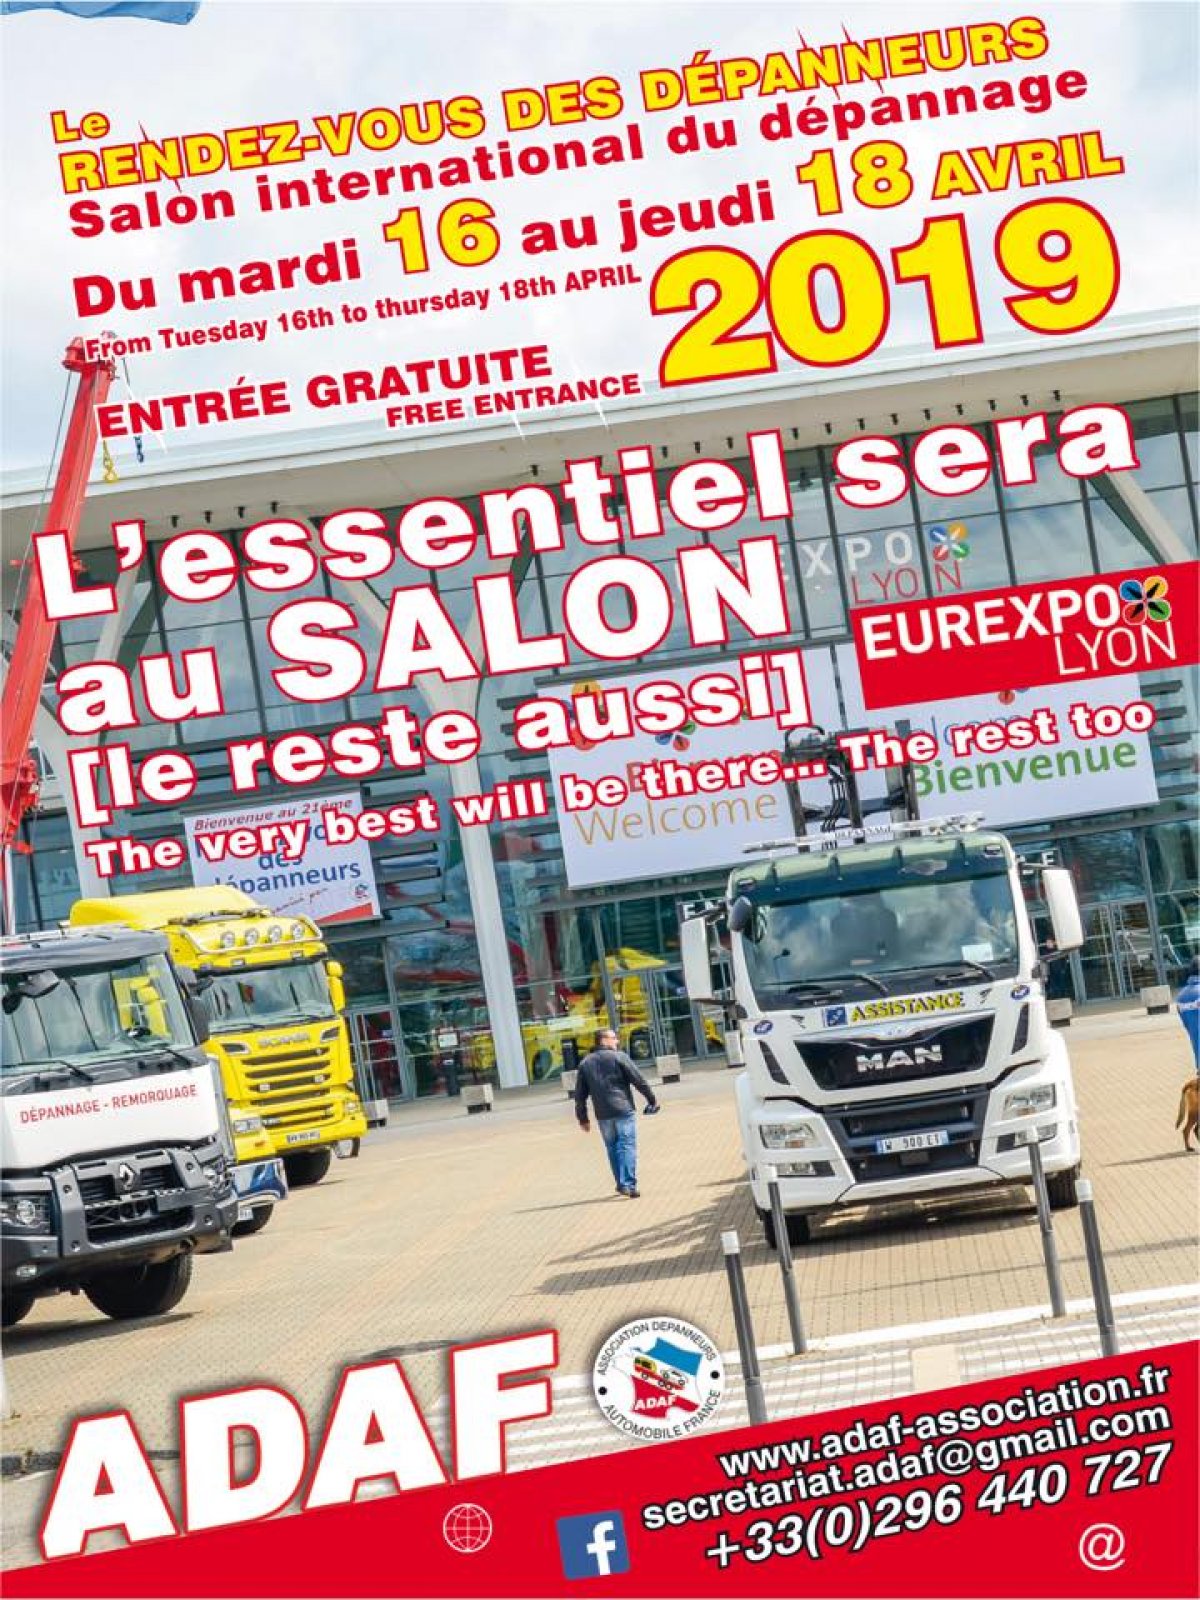 Tow show at lyon from 16 to 18 of april 2019